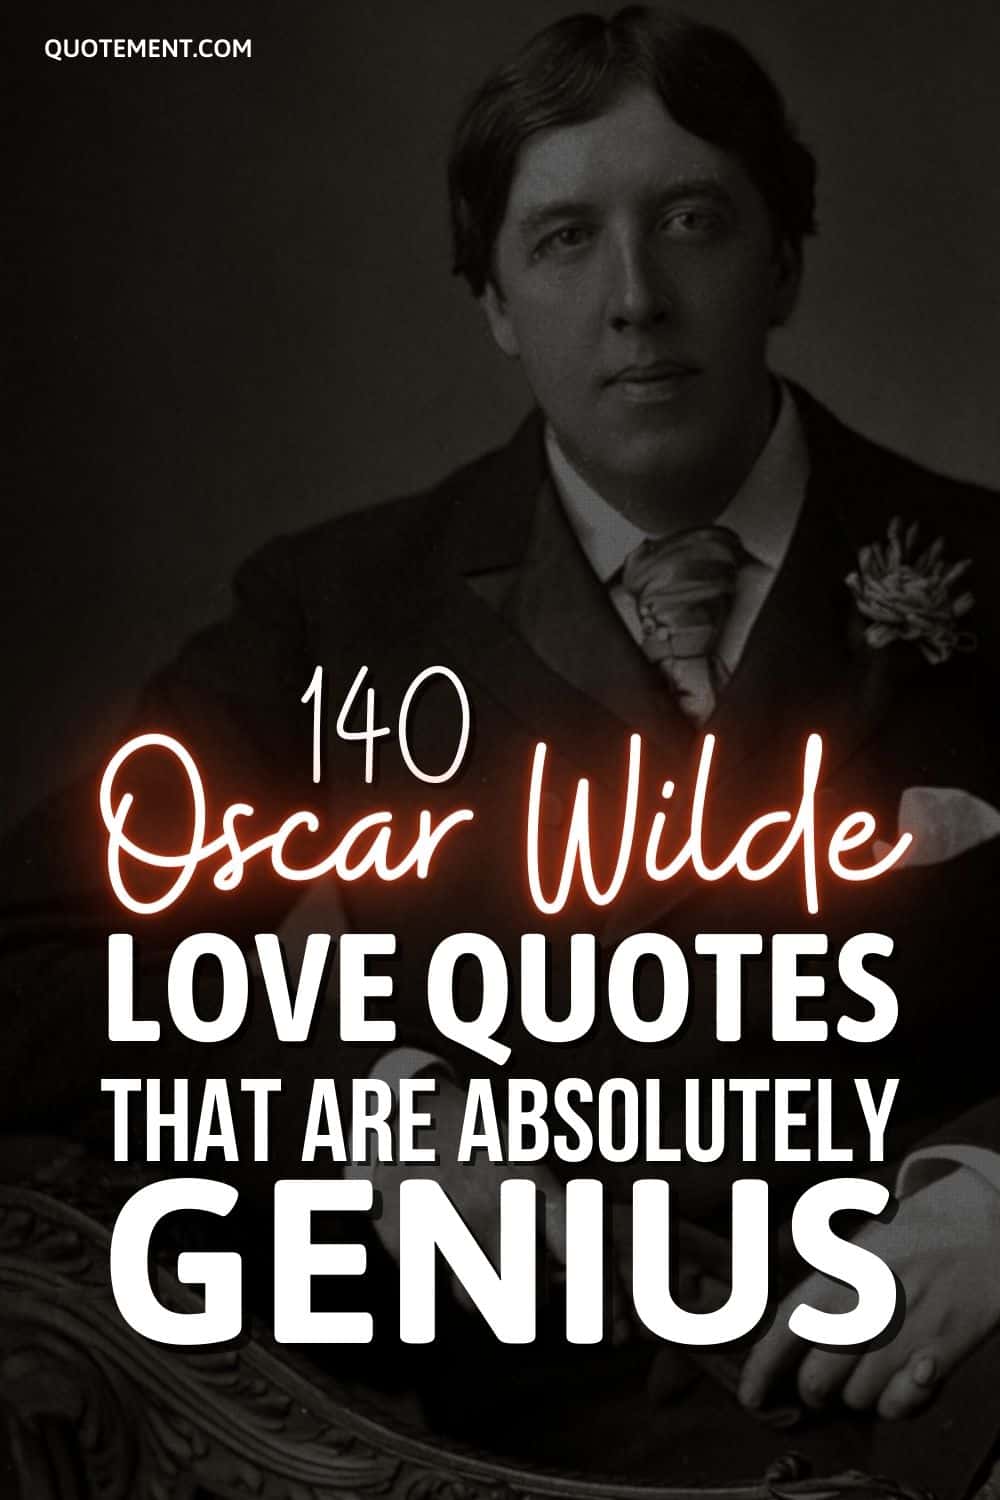 140 Oscar Wilde Love Quotes That Are Absolutely Genius